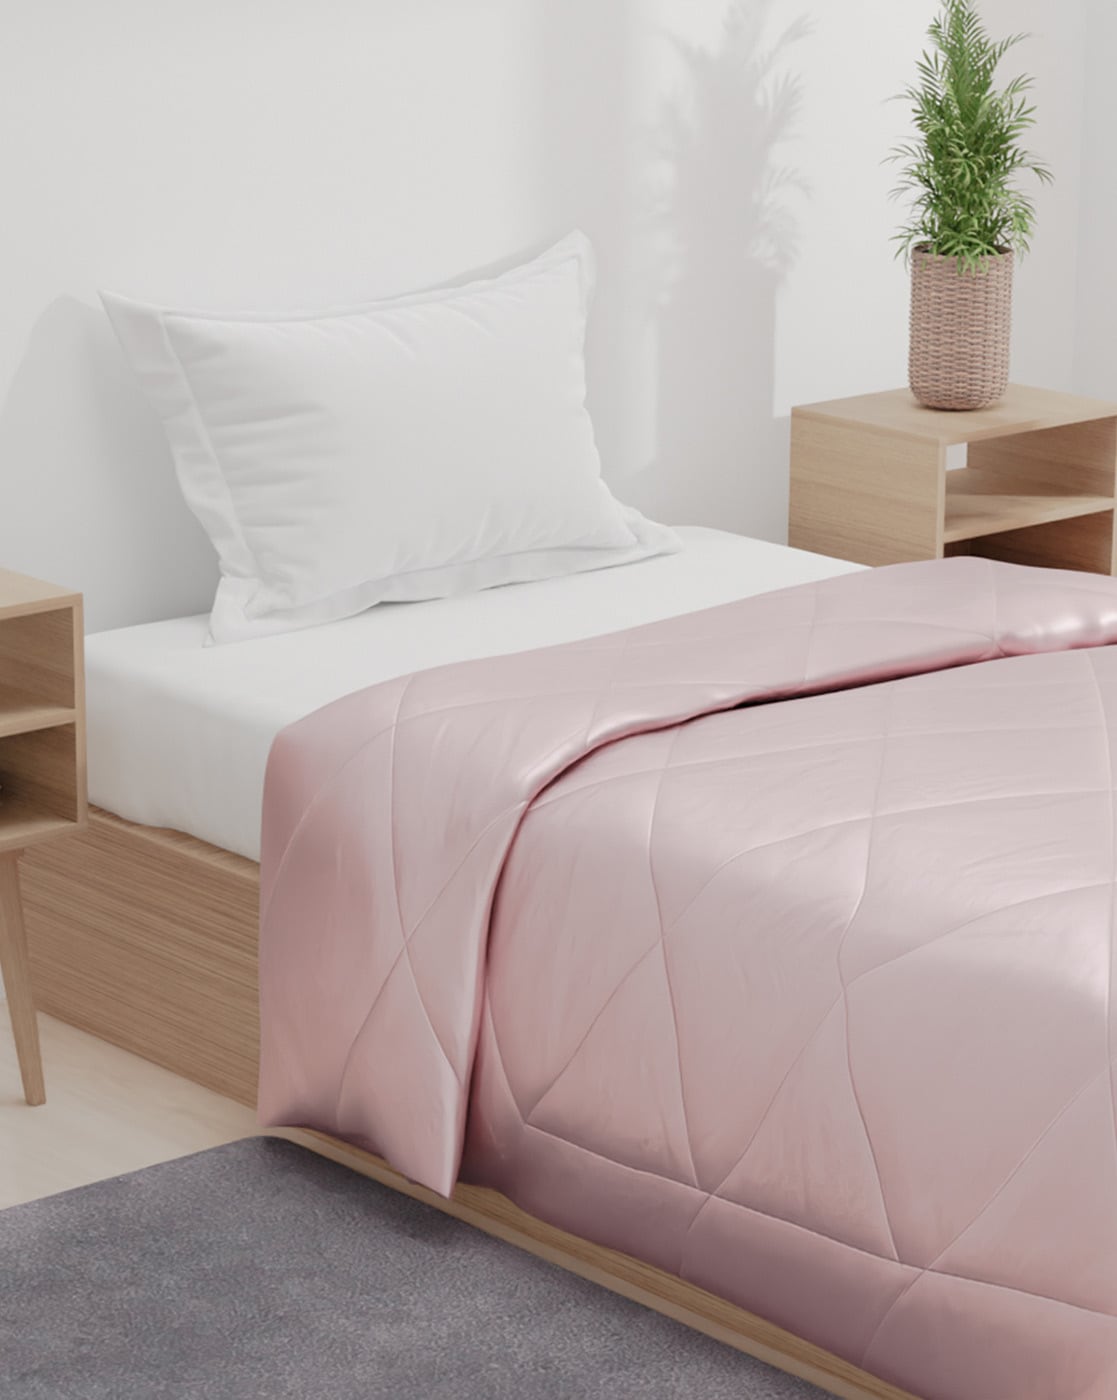  All Season - Twin/Twin XL Size Pink Baffle Box Stitched  Comforter 100% Cotton Fluffy 500 GSM Fill Power Breathable Lightweight  Quilted Down Comforter Set(1 Comforter with 2 Pillow Cases) : Home & Kitchen